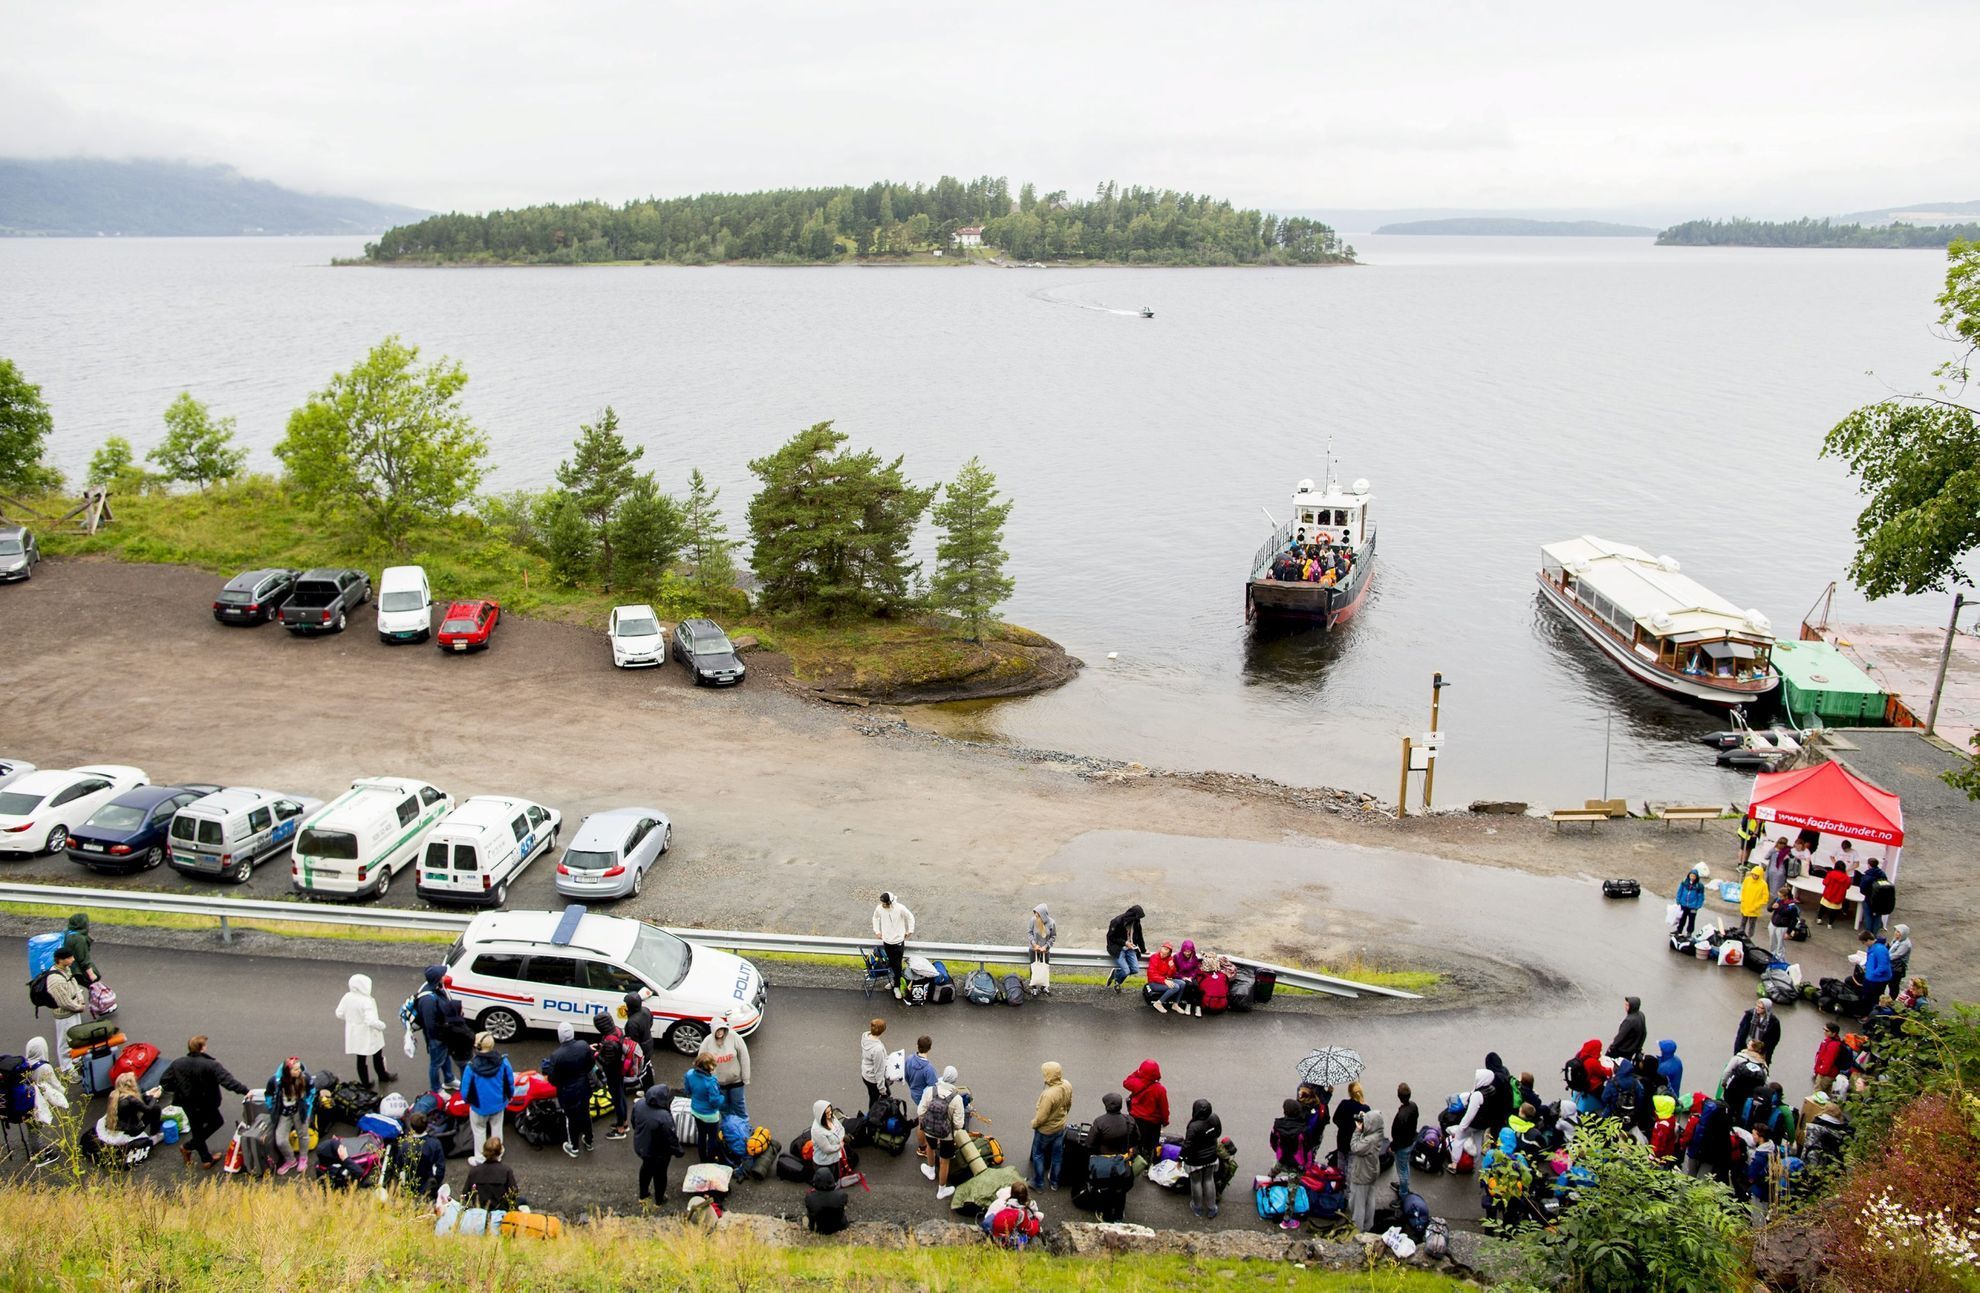 Youths stand in a line to wait for the MS Thorbjorn ferry to take them to Utoya island